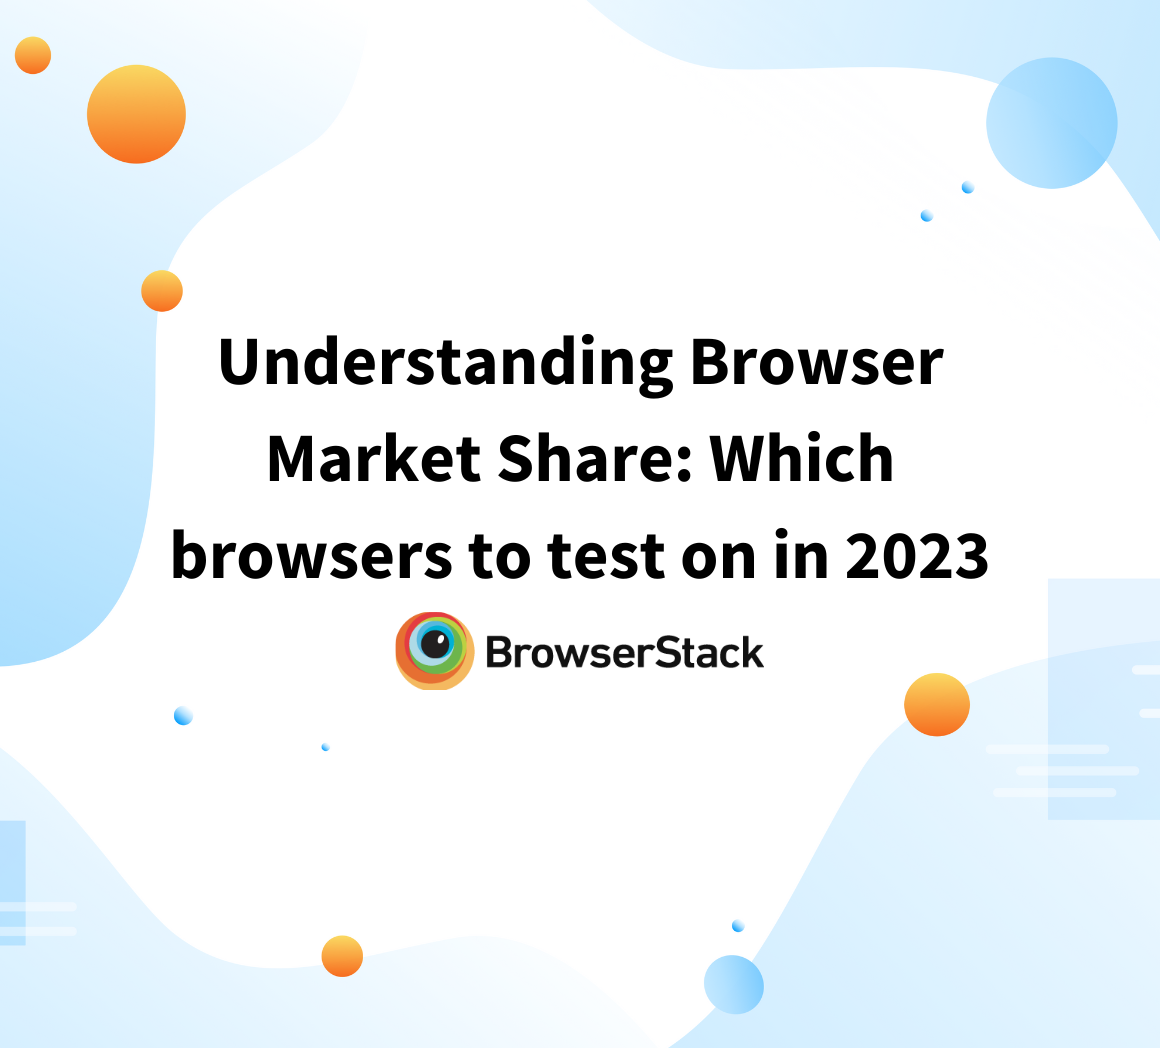 Understanding Browser Market Share: Which browsers to test on in 2023